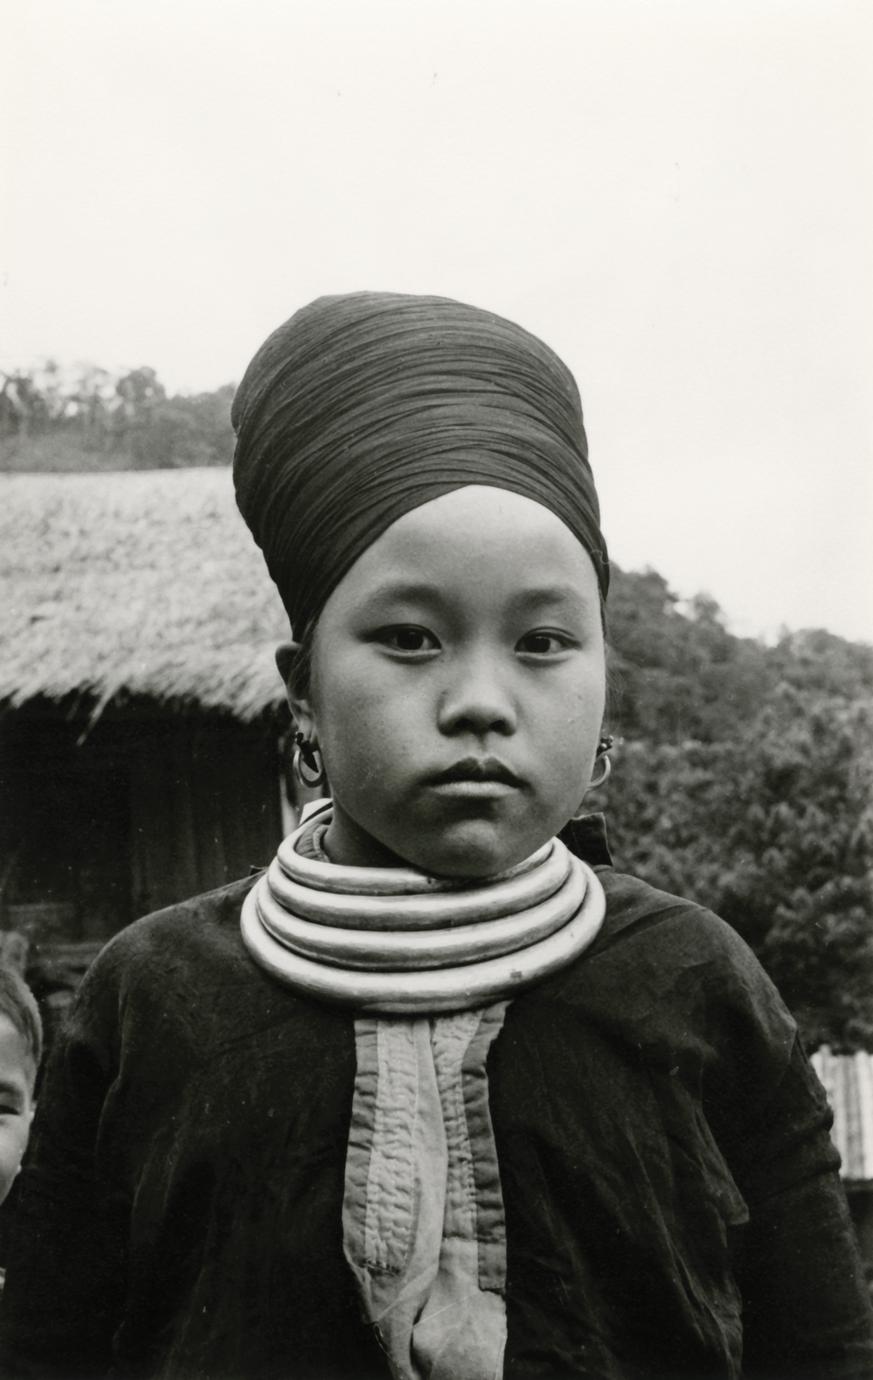 Blue Hmong (Hmong Njua) woman in a village in the vicinity of Muang Vang Vieng in Vientiane Province.